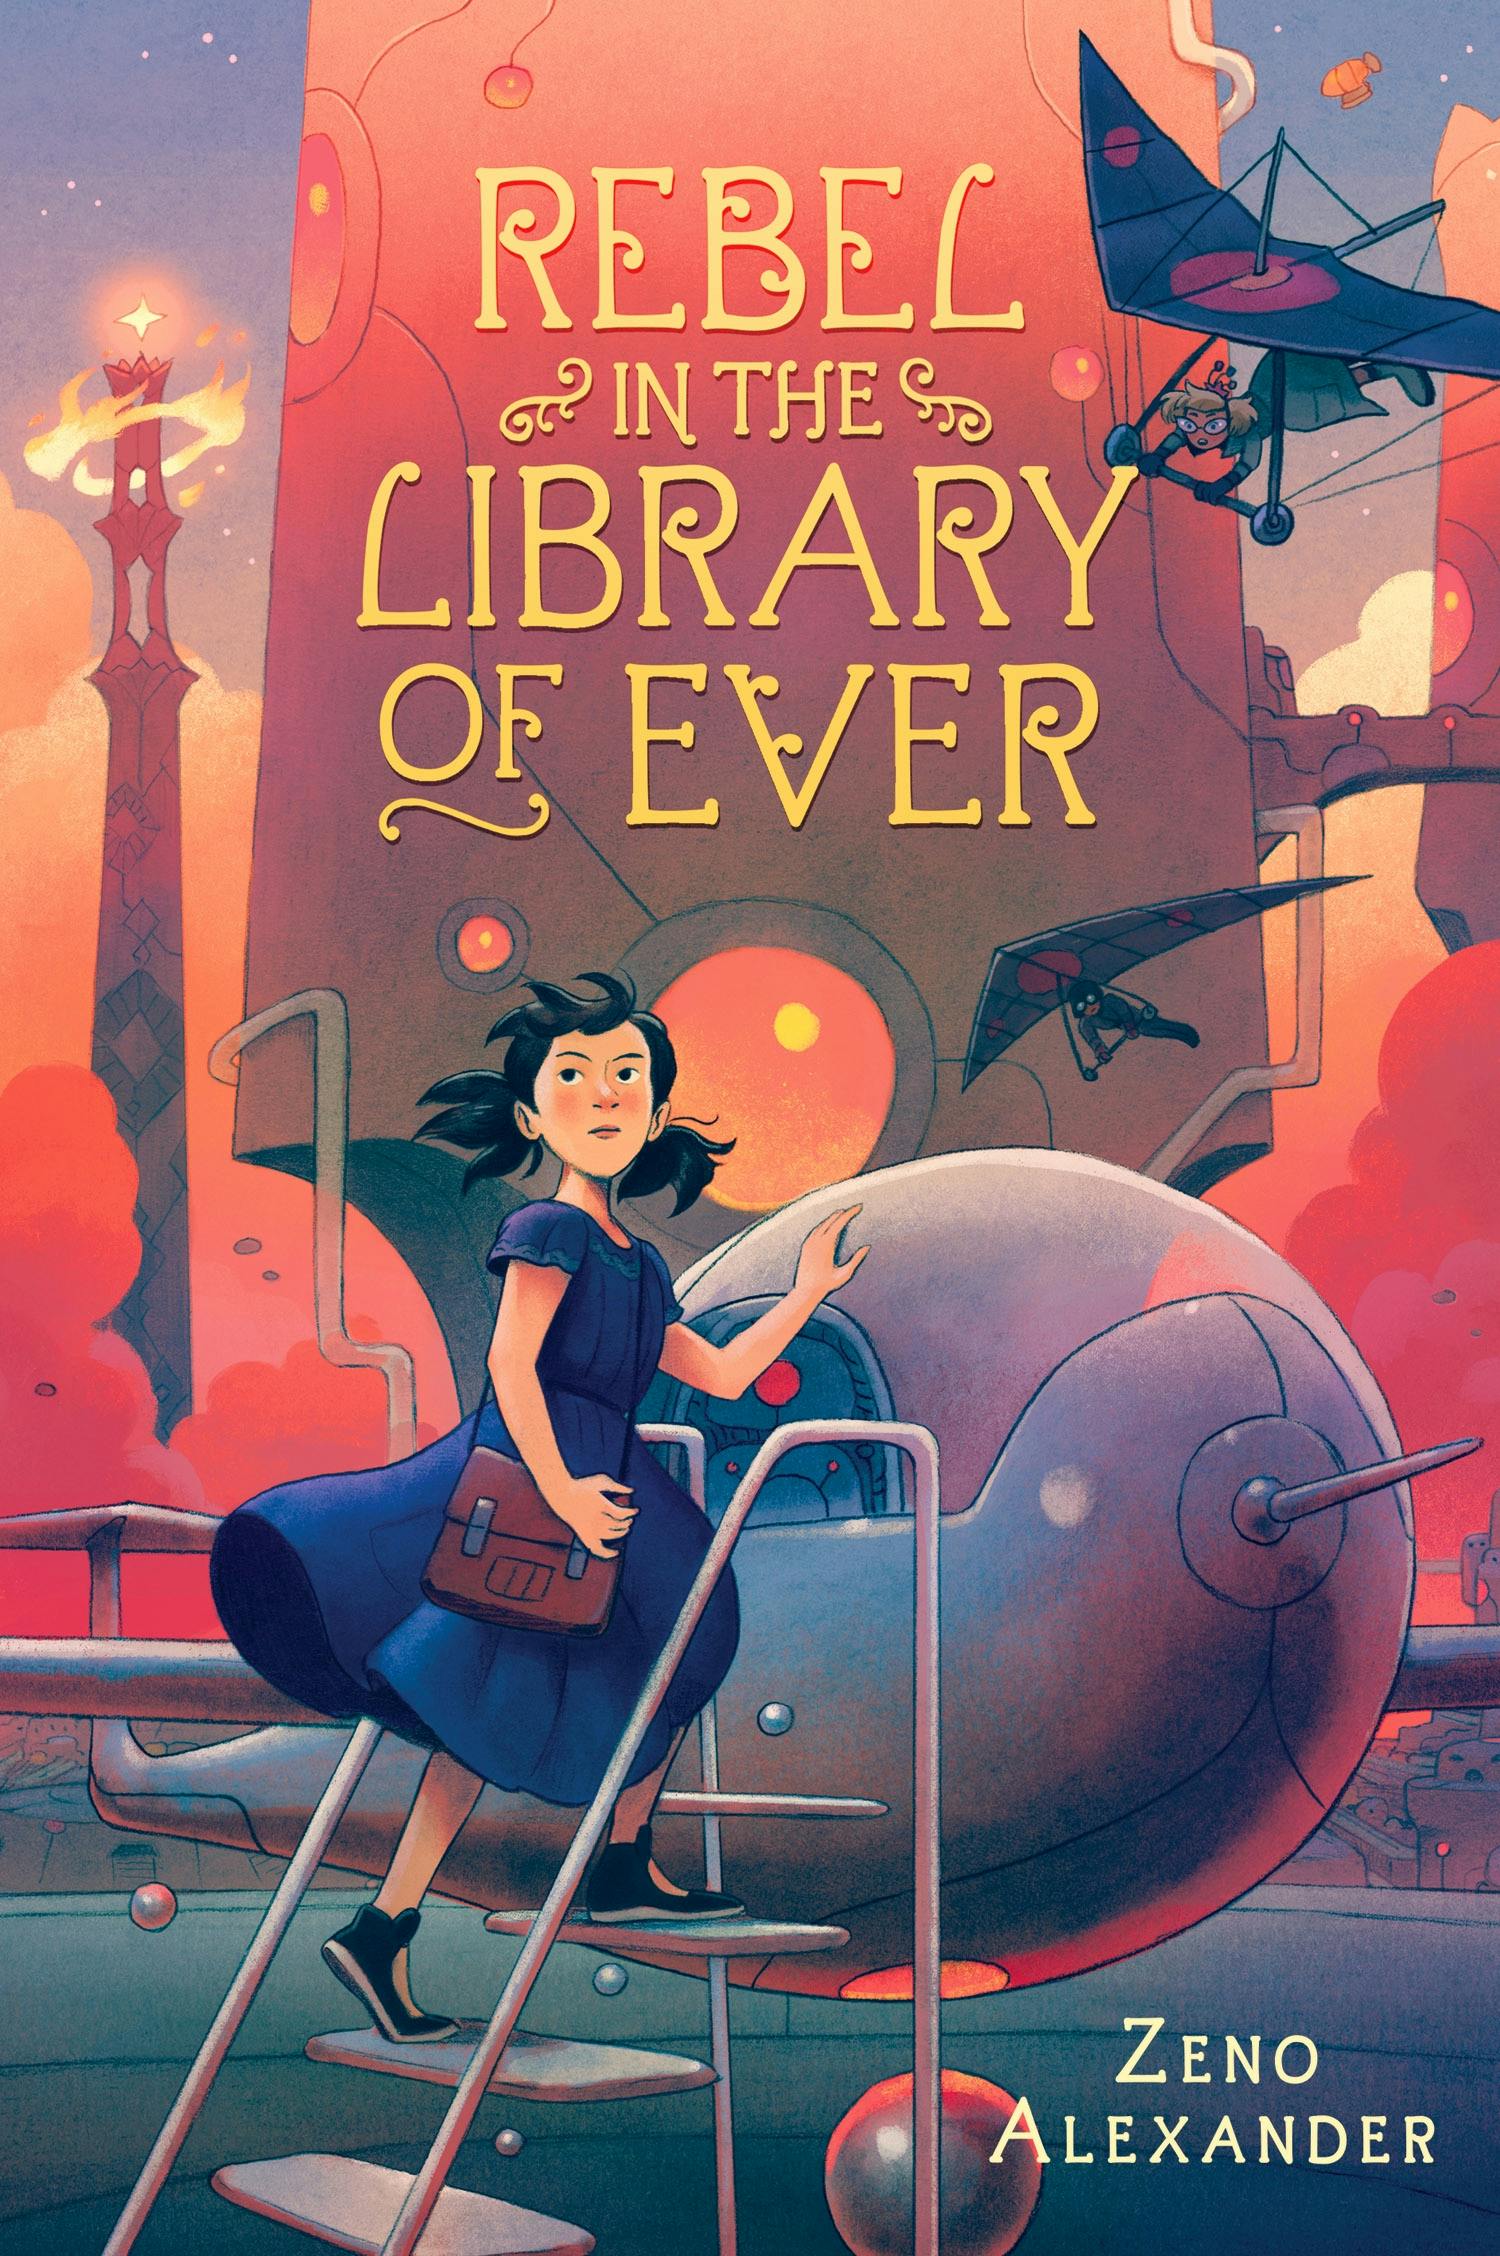 The Library of Ever, Series